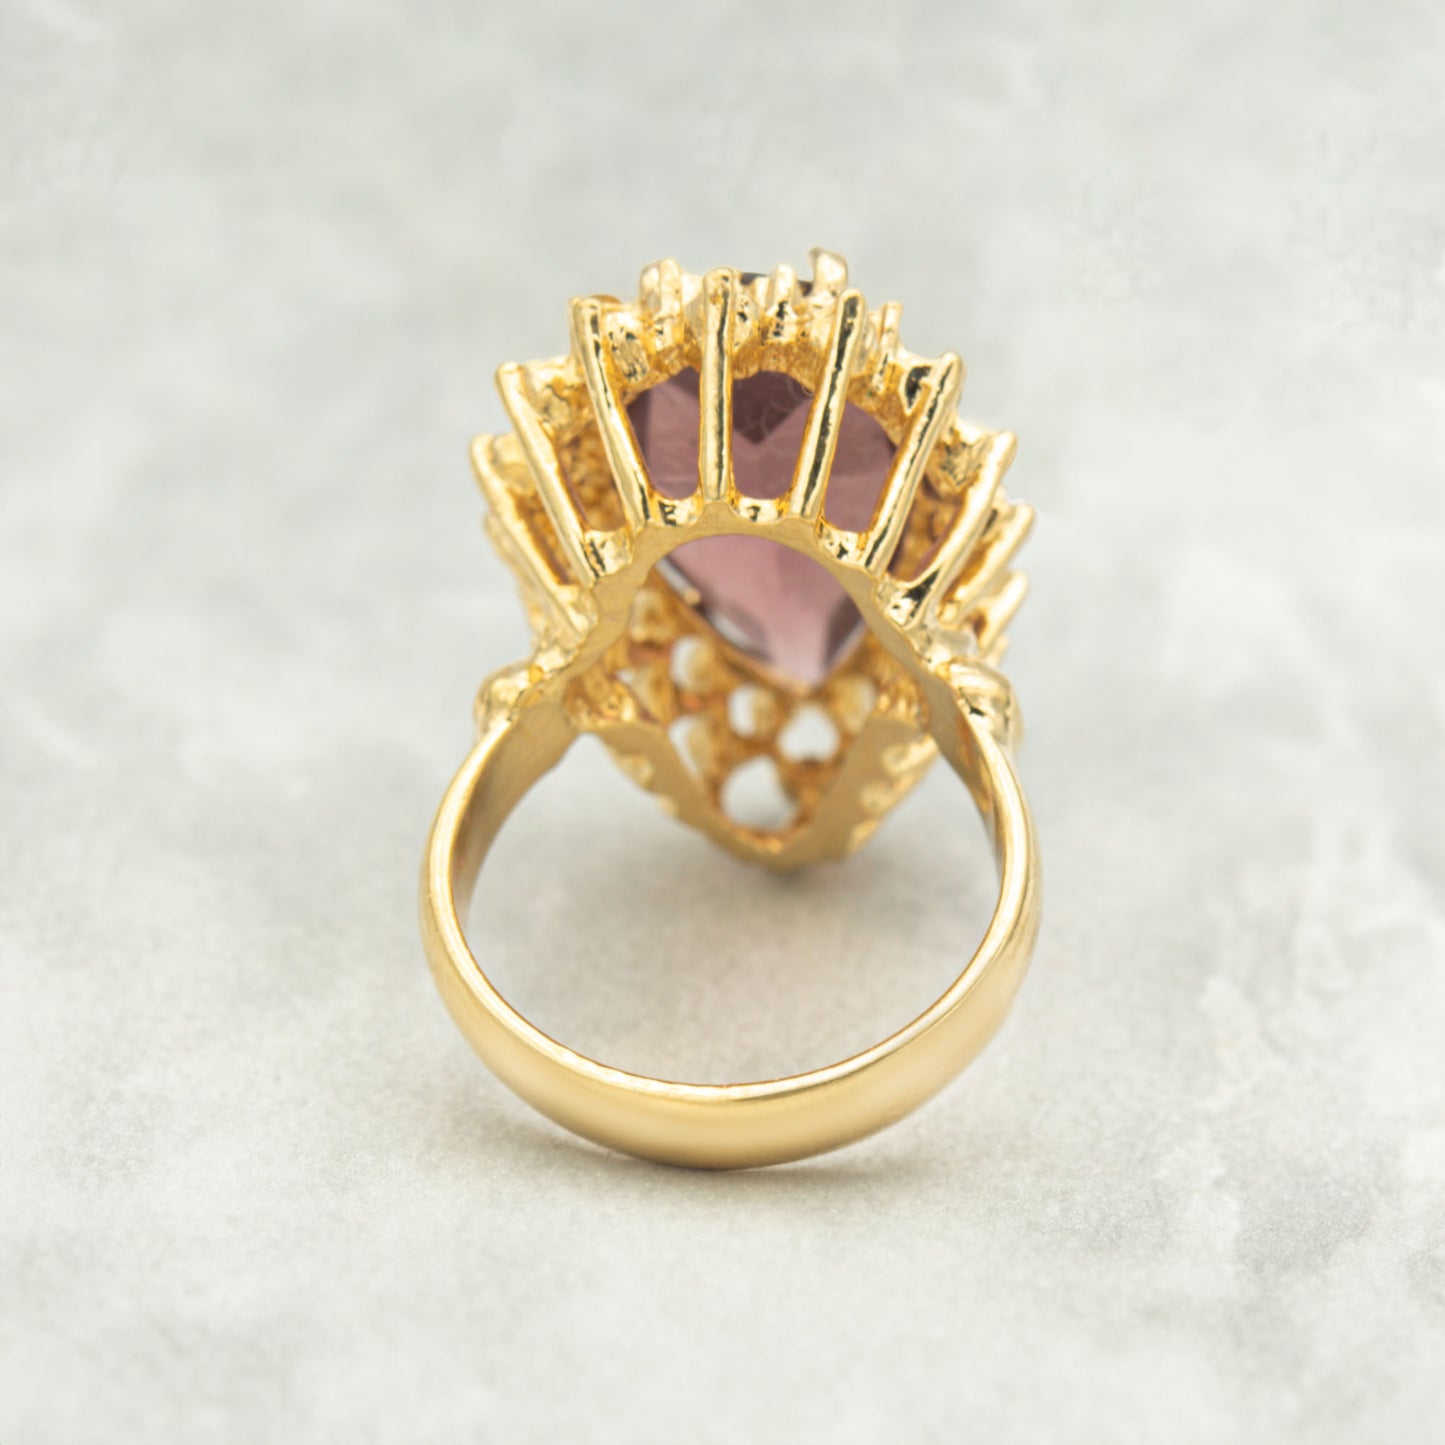 Victorian Style Ring Austrian Crystals 18k White or Yellow Gold Cocktail Ring Antique Womans #R212